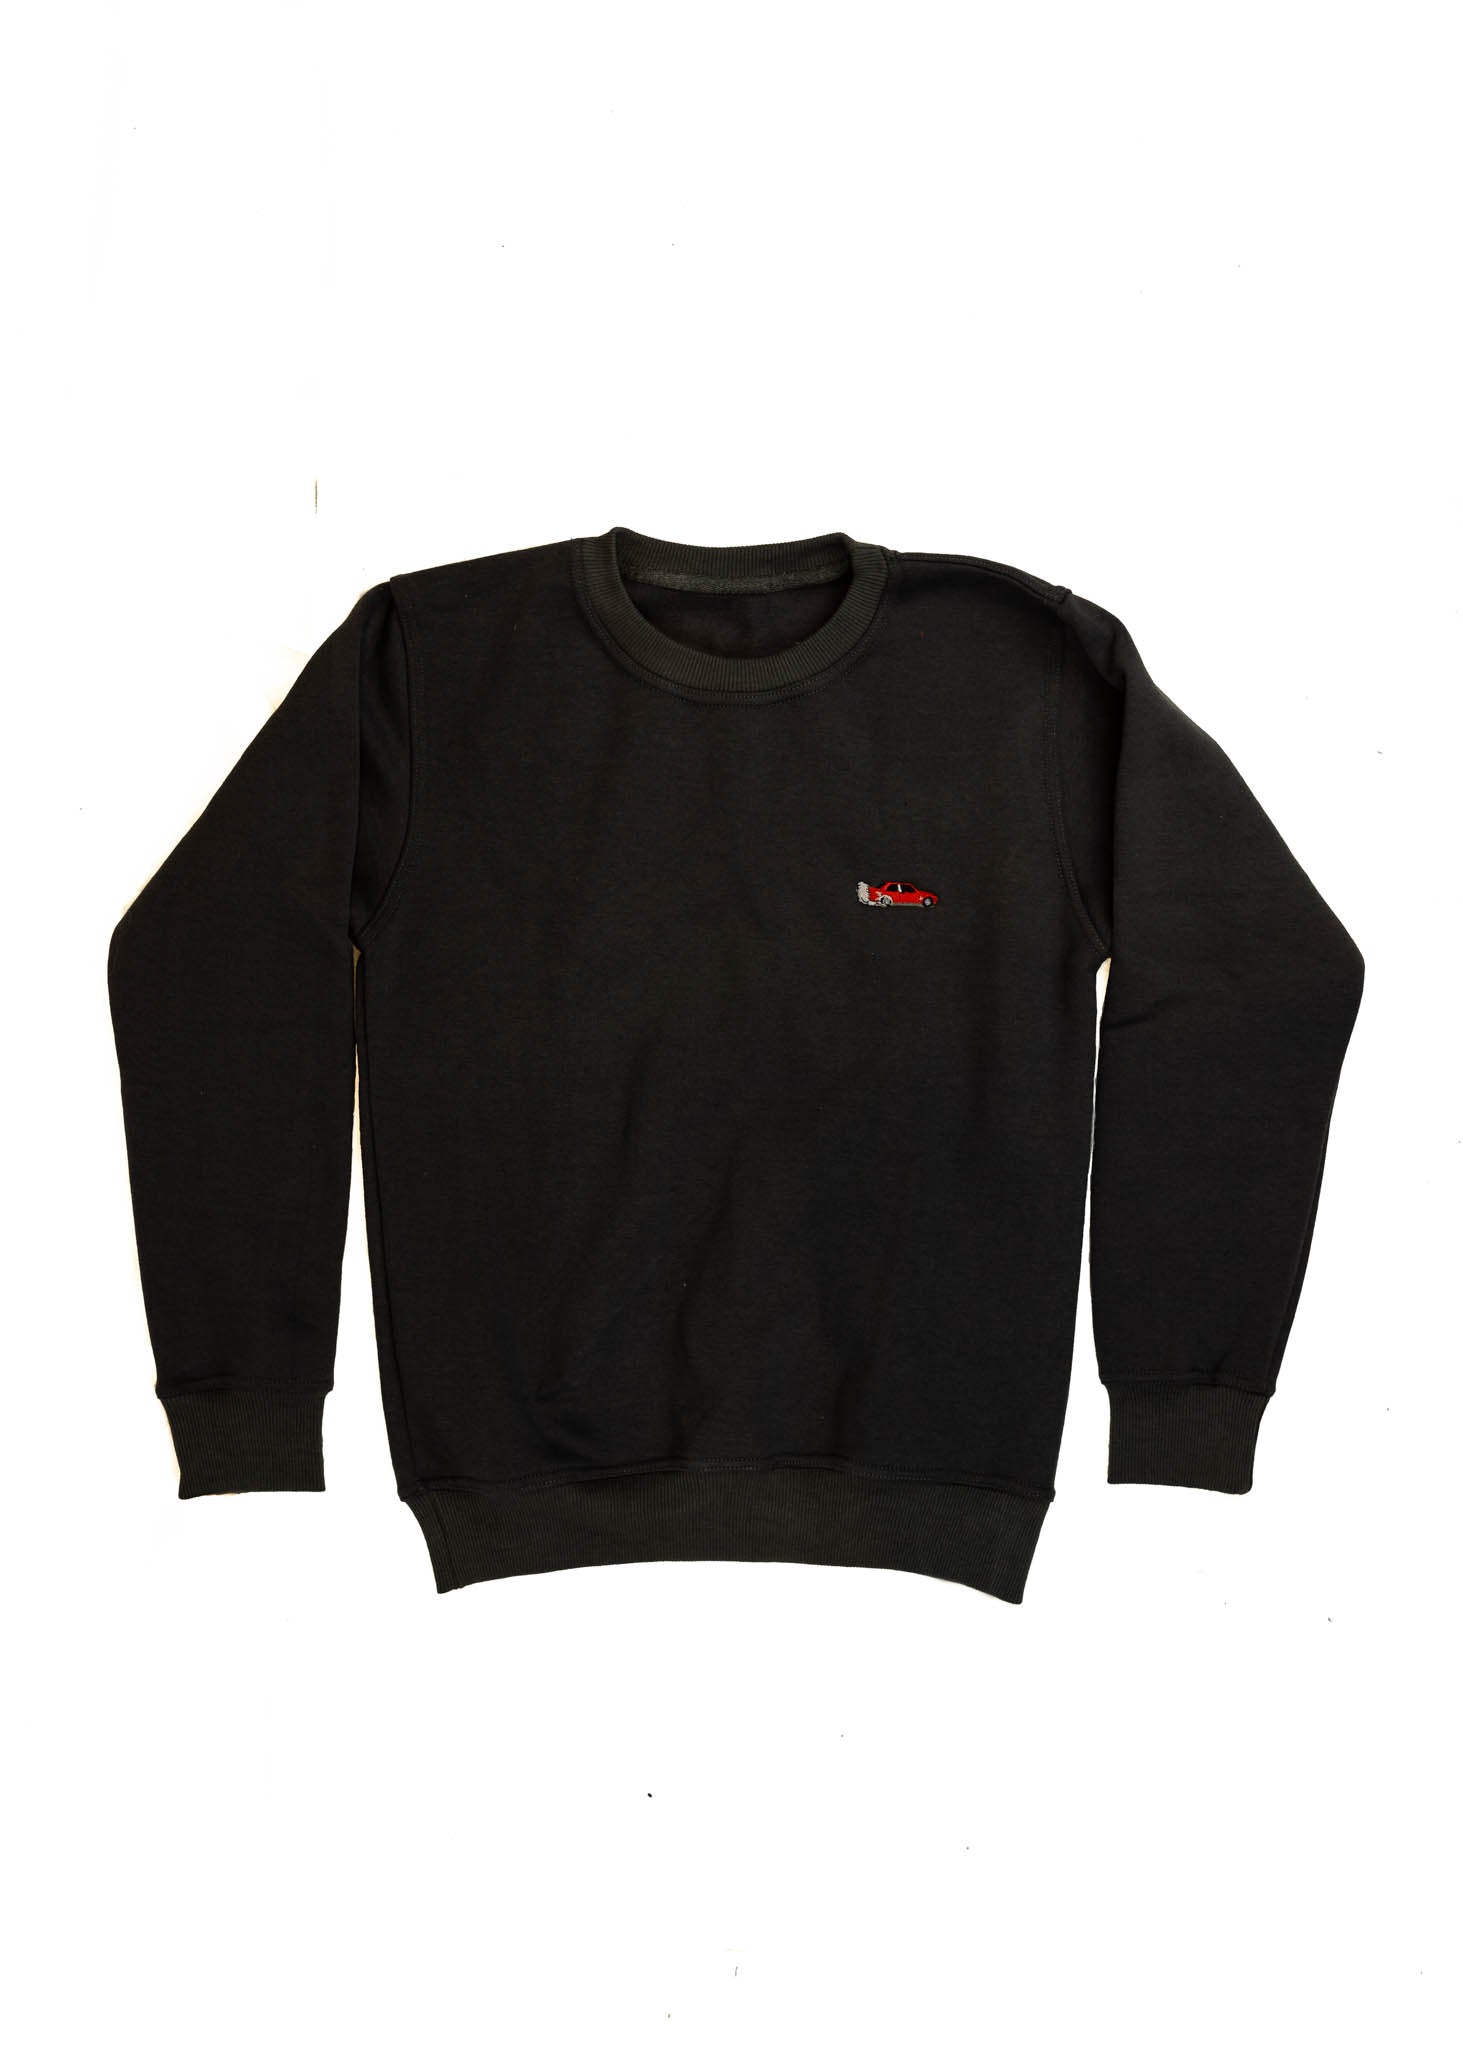 A dark grey BMW/Bimmer E30 M3 crewneck sweater for men. Photo is a front view of the sweater with an embroidered red BMW E30 M3 doing a burnout. Fabric is 100% cotton and high quality and fits to size. The style is long sleeve, crew neck, and embroidery on left chest.